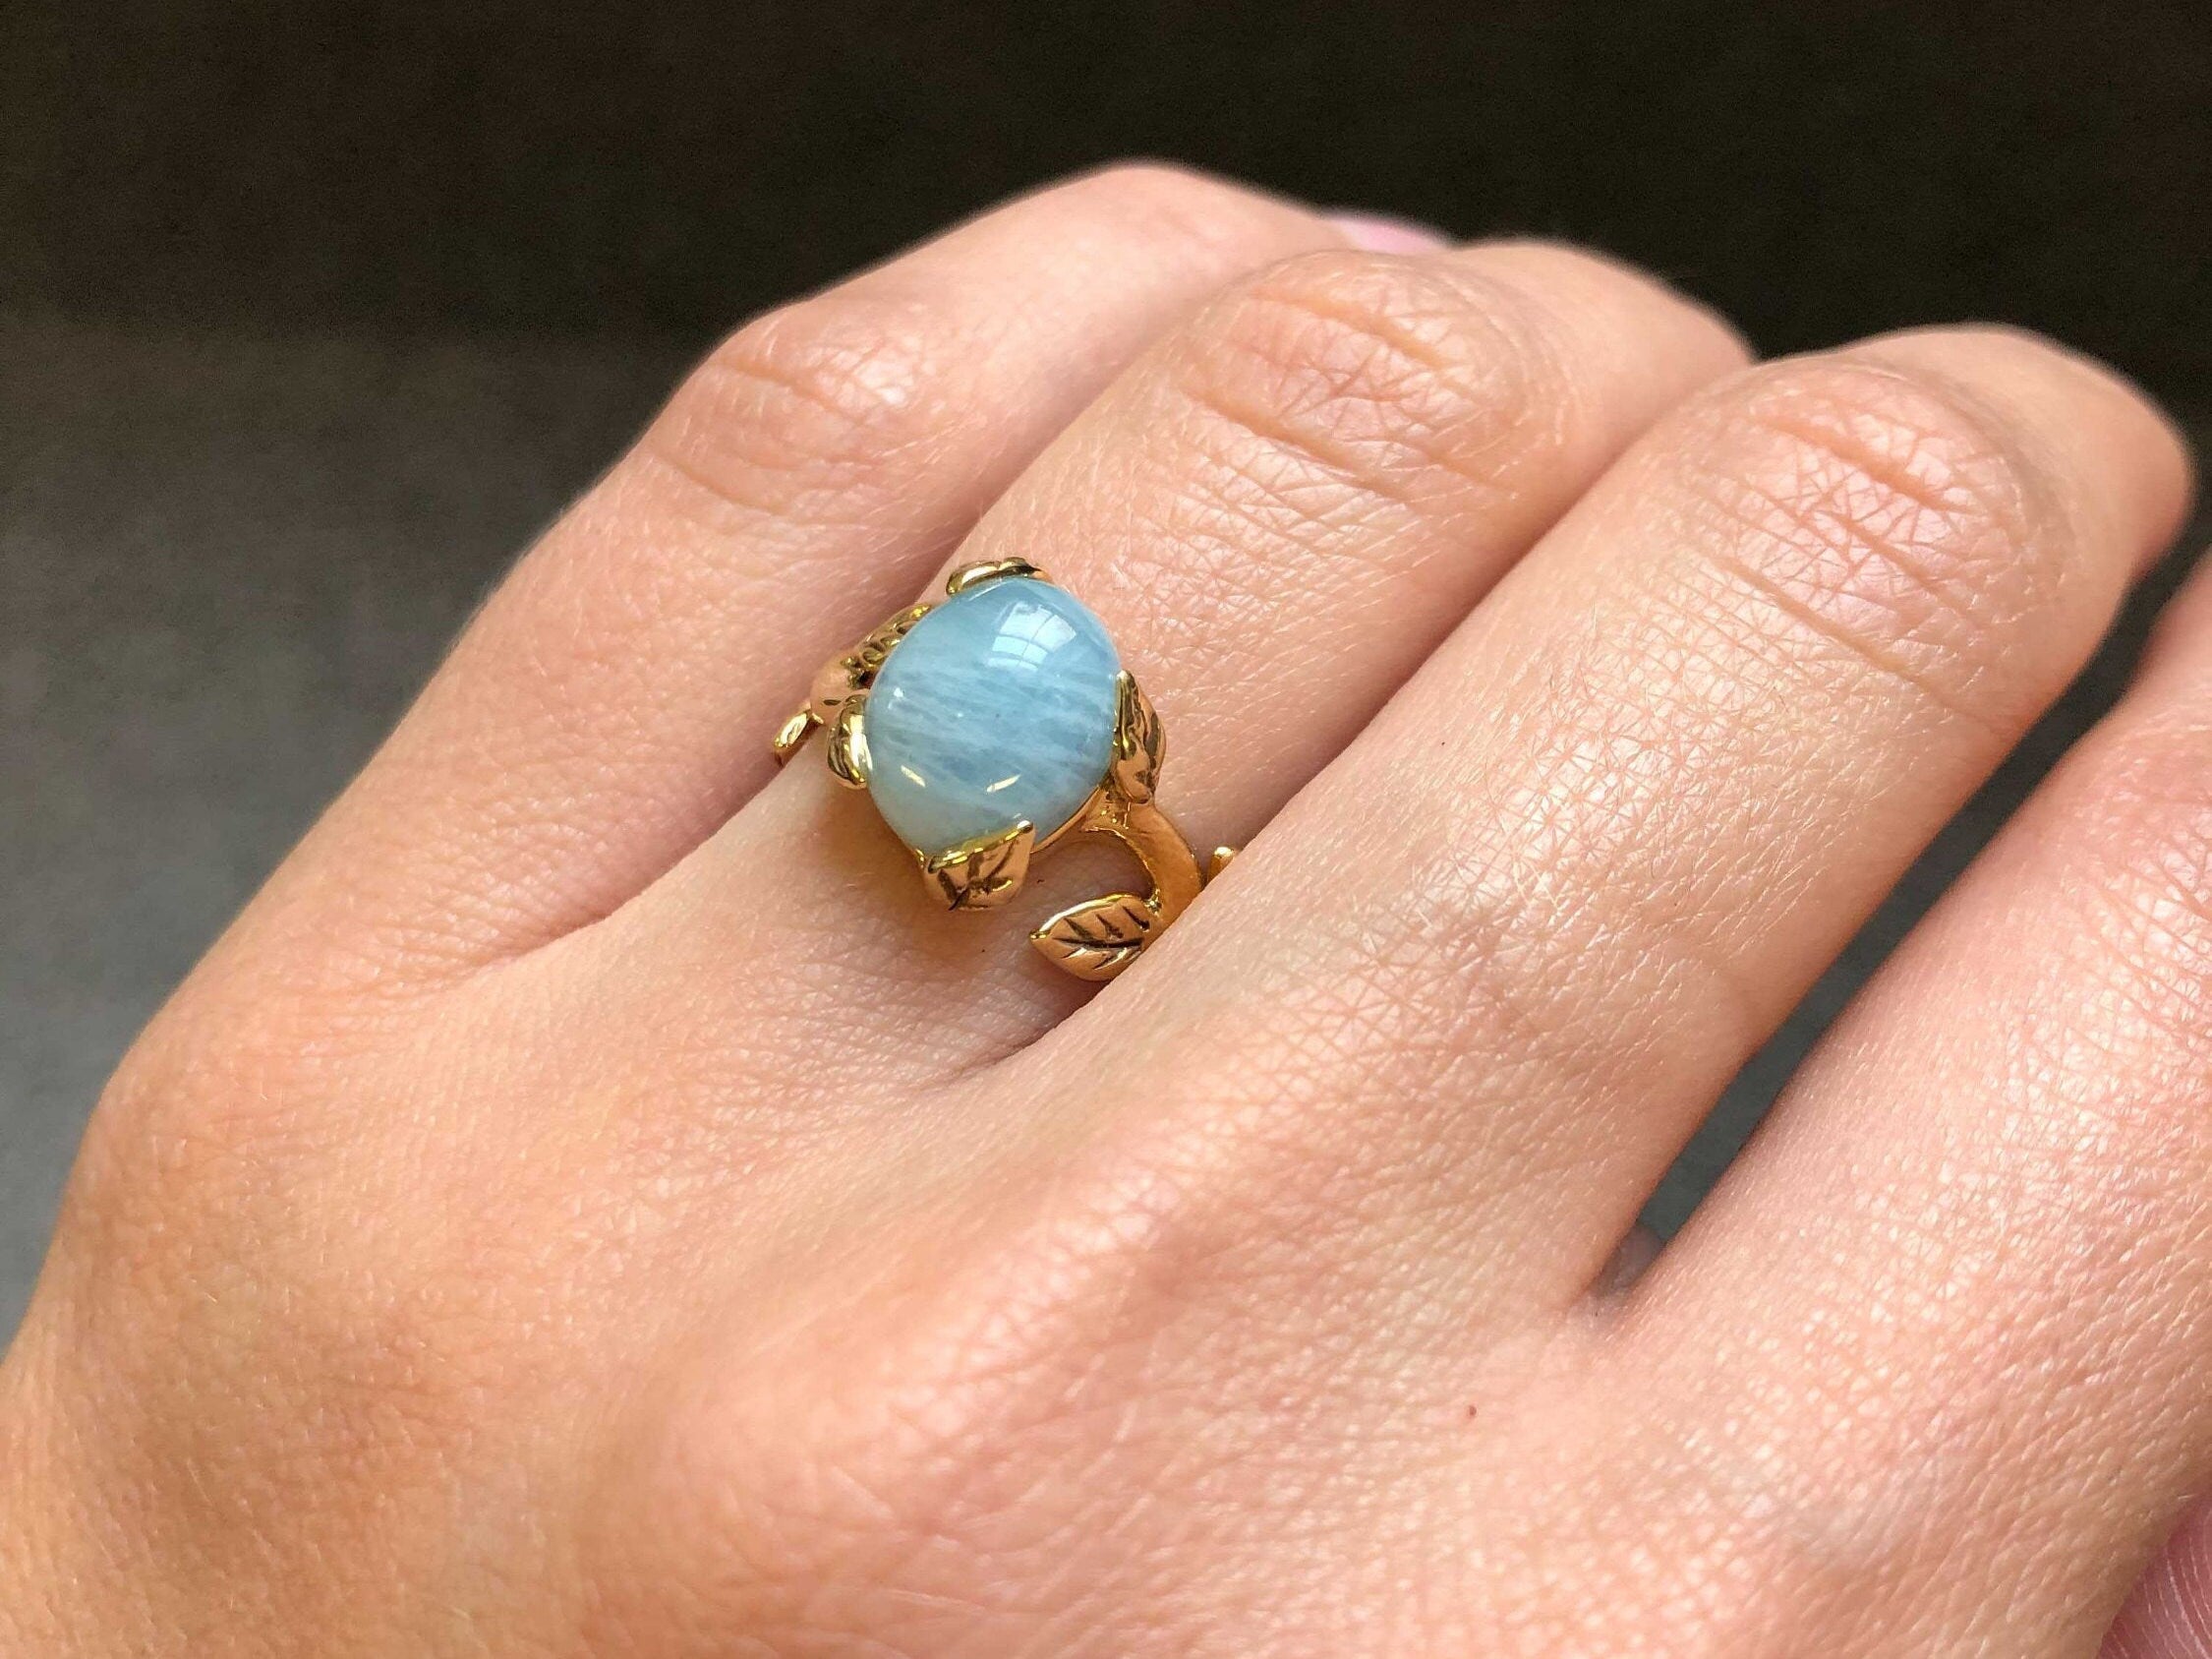 Gold Aquamarine Ring, Natural Aquamarine, Vintage Ring, Gold Leaf Ring, March Birthstone, Gold Antique Ring, Gold Plated Ring, Proposal Ring